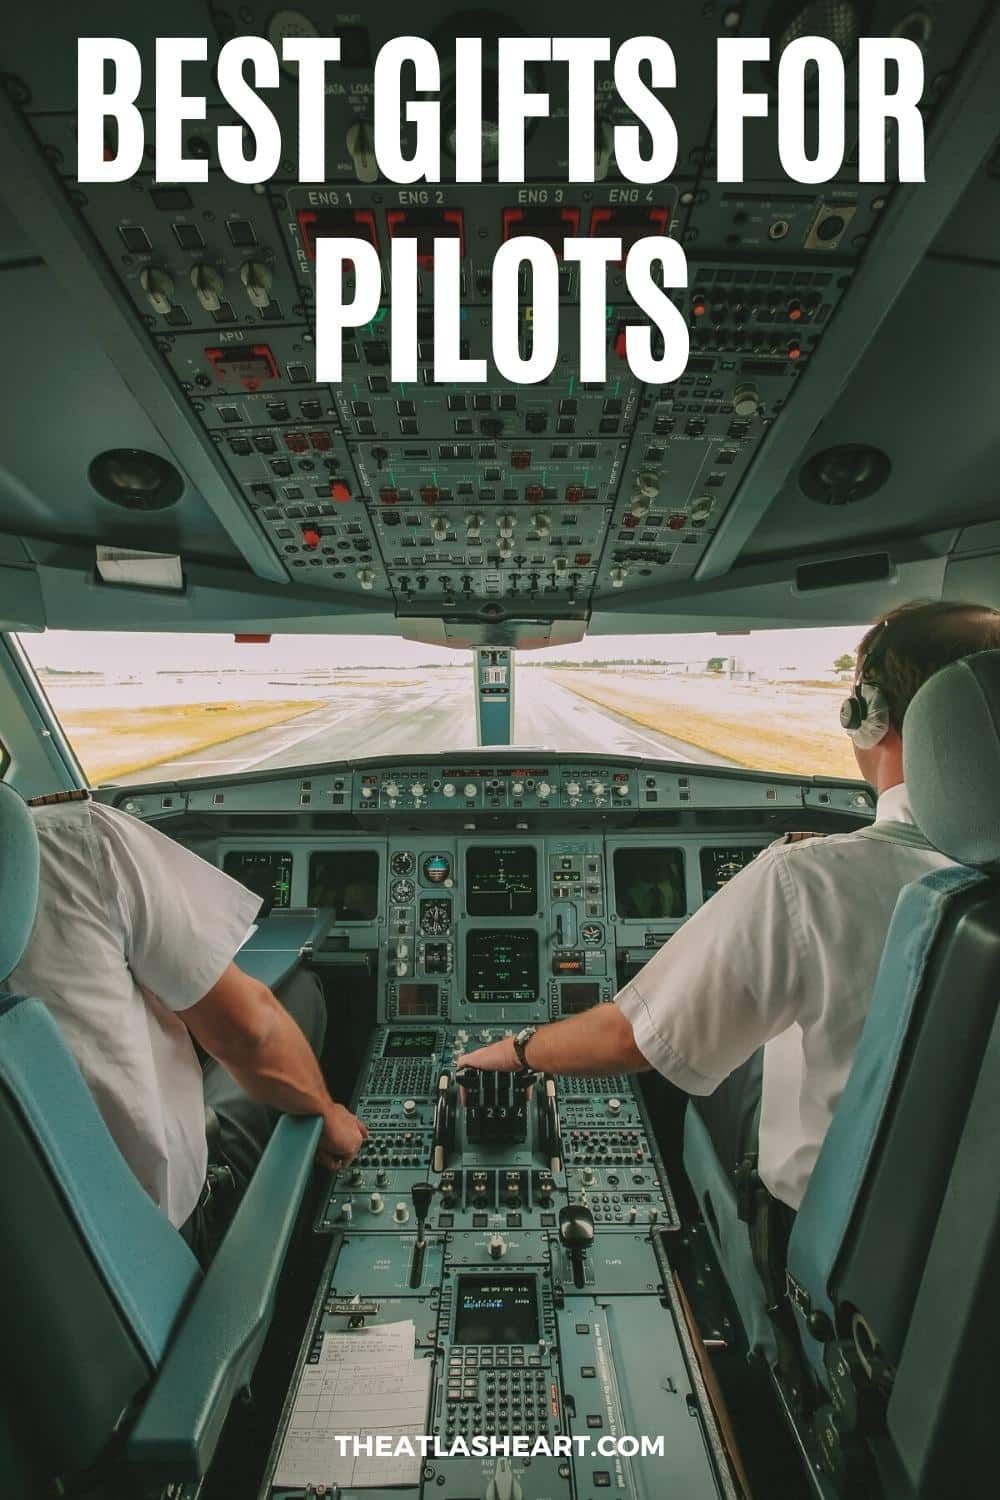 35 Best Gifts for Pilots [At Every Stage of Their Career]